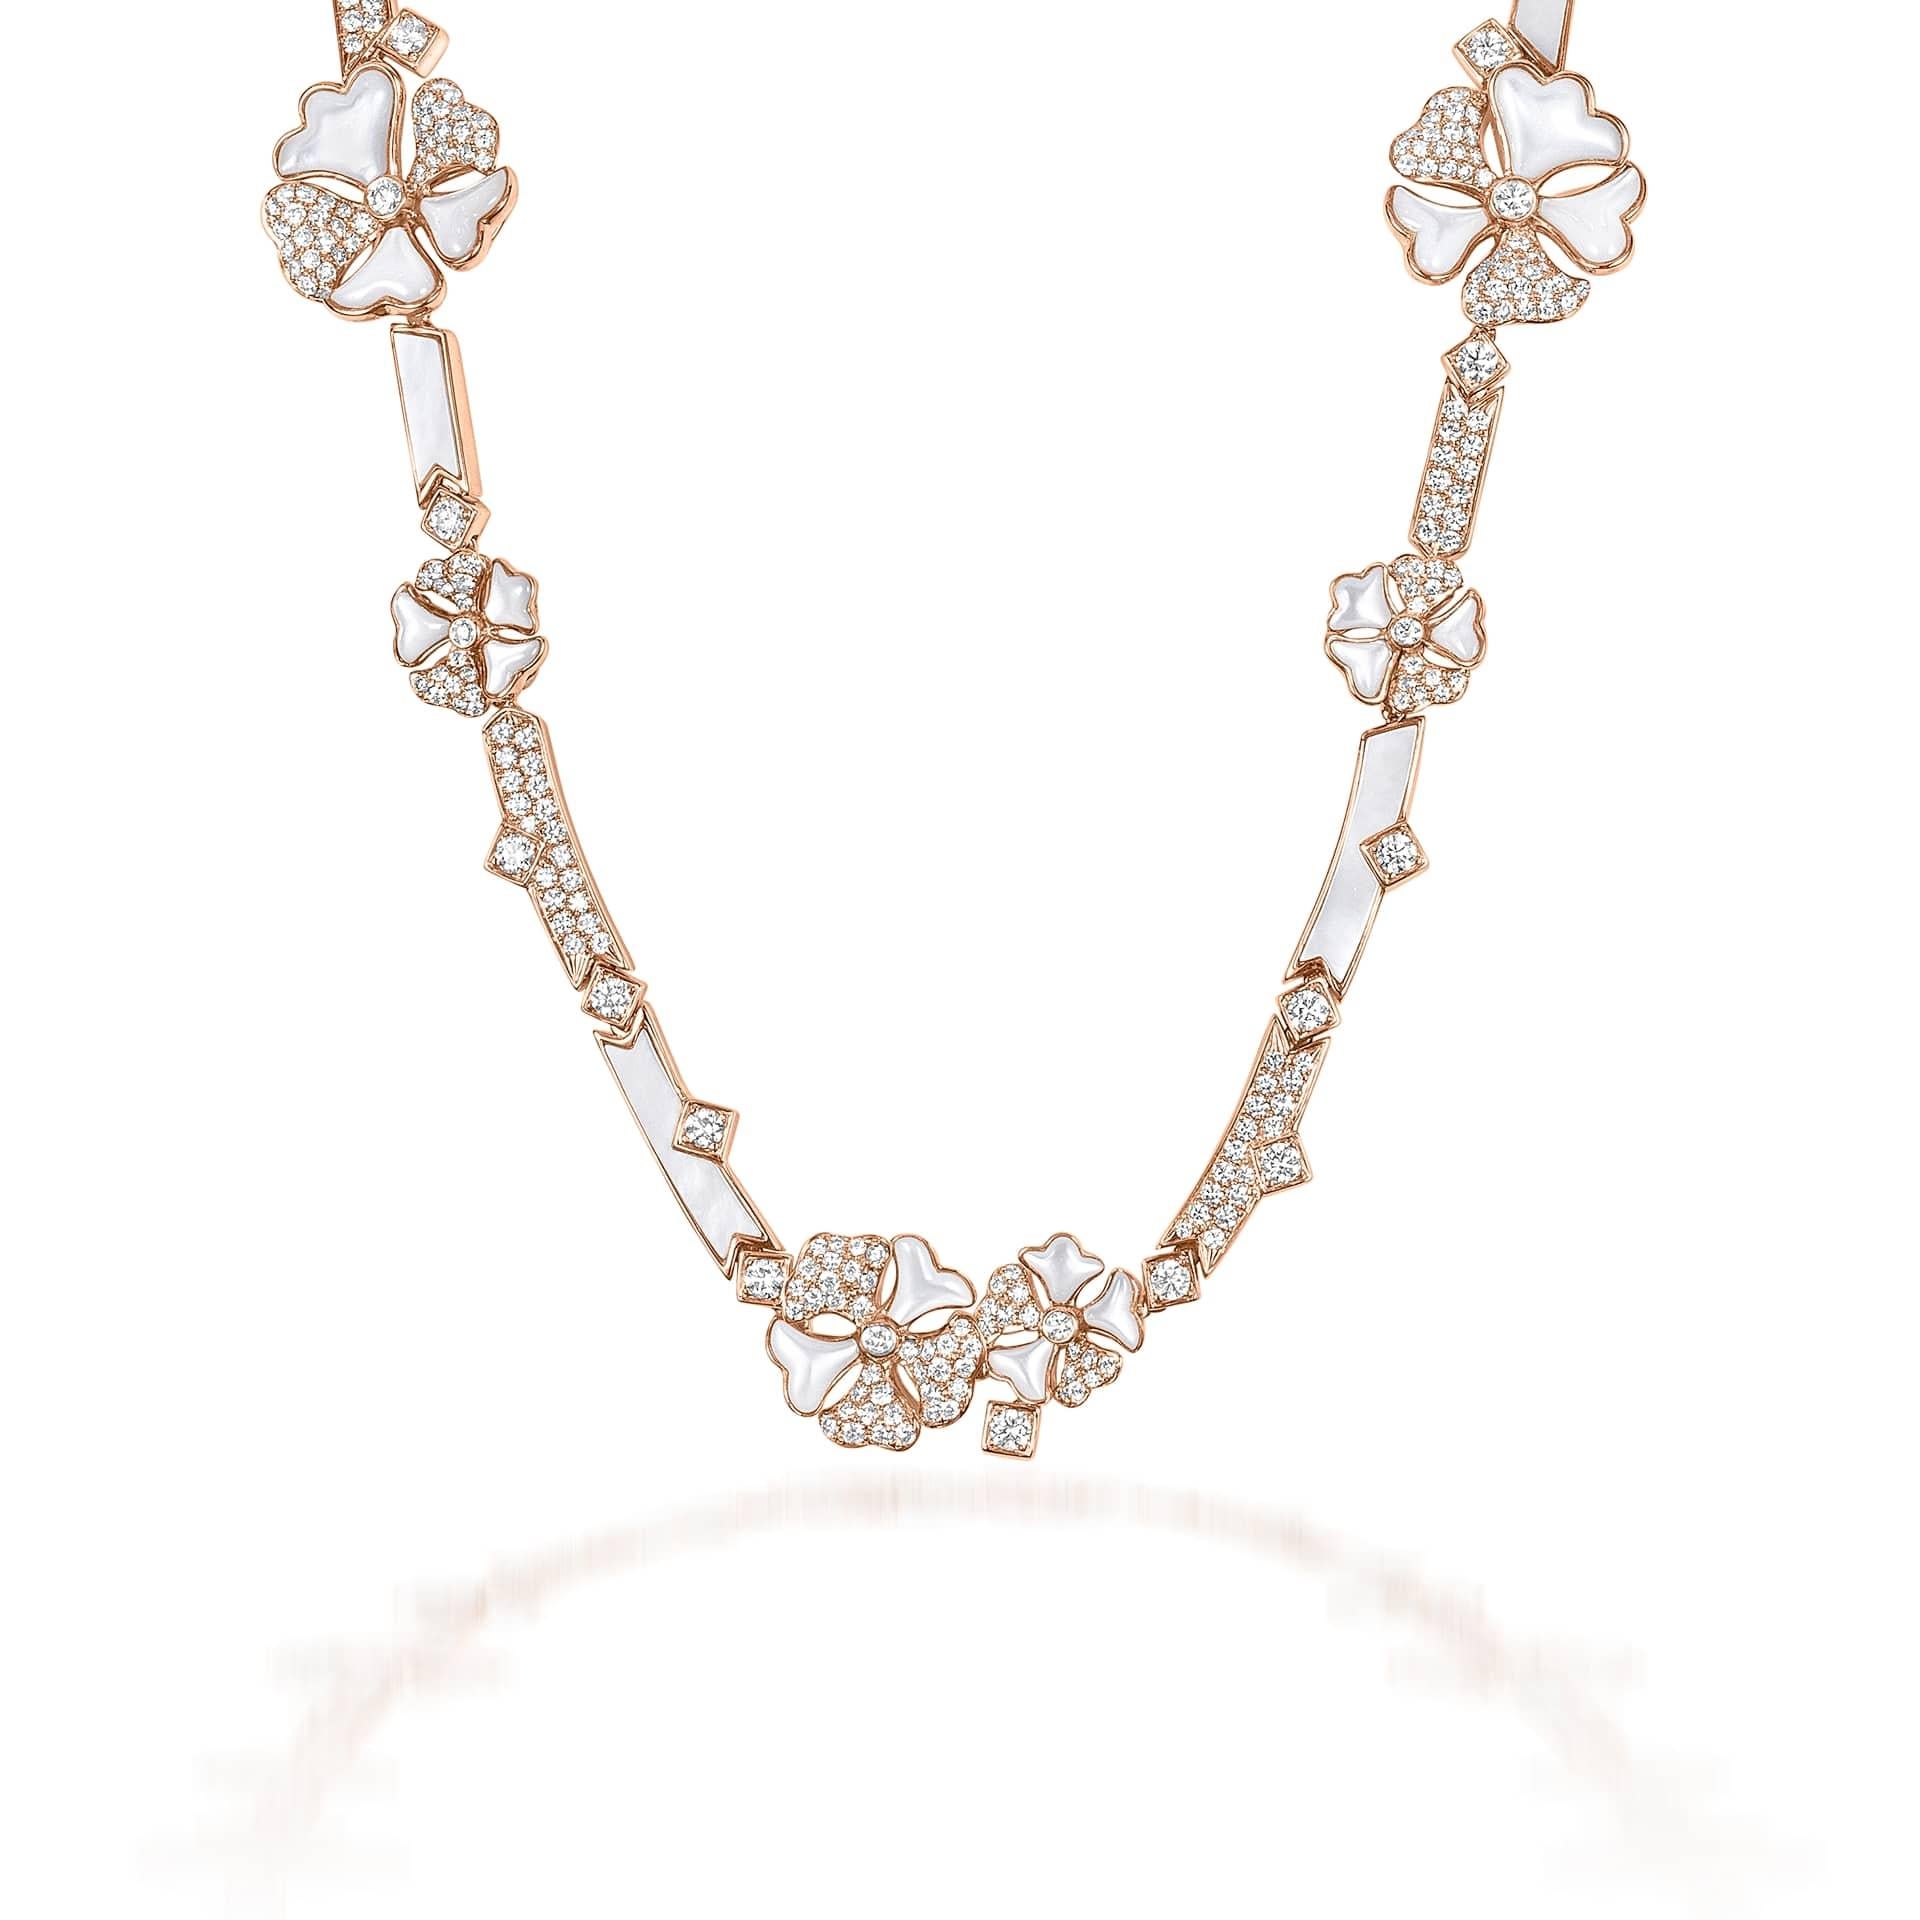 Bloom Diamond and Mother-of-Pearl Long Flower Chain Necklace in 18K Rose Gold

Inspired by the exquisite petals of the alpine cinquefoil flower, the Bloom collection combines the richness of diamonds and precious metals with the light versatility of